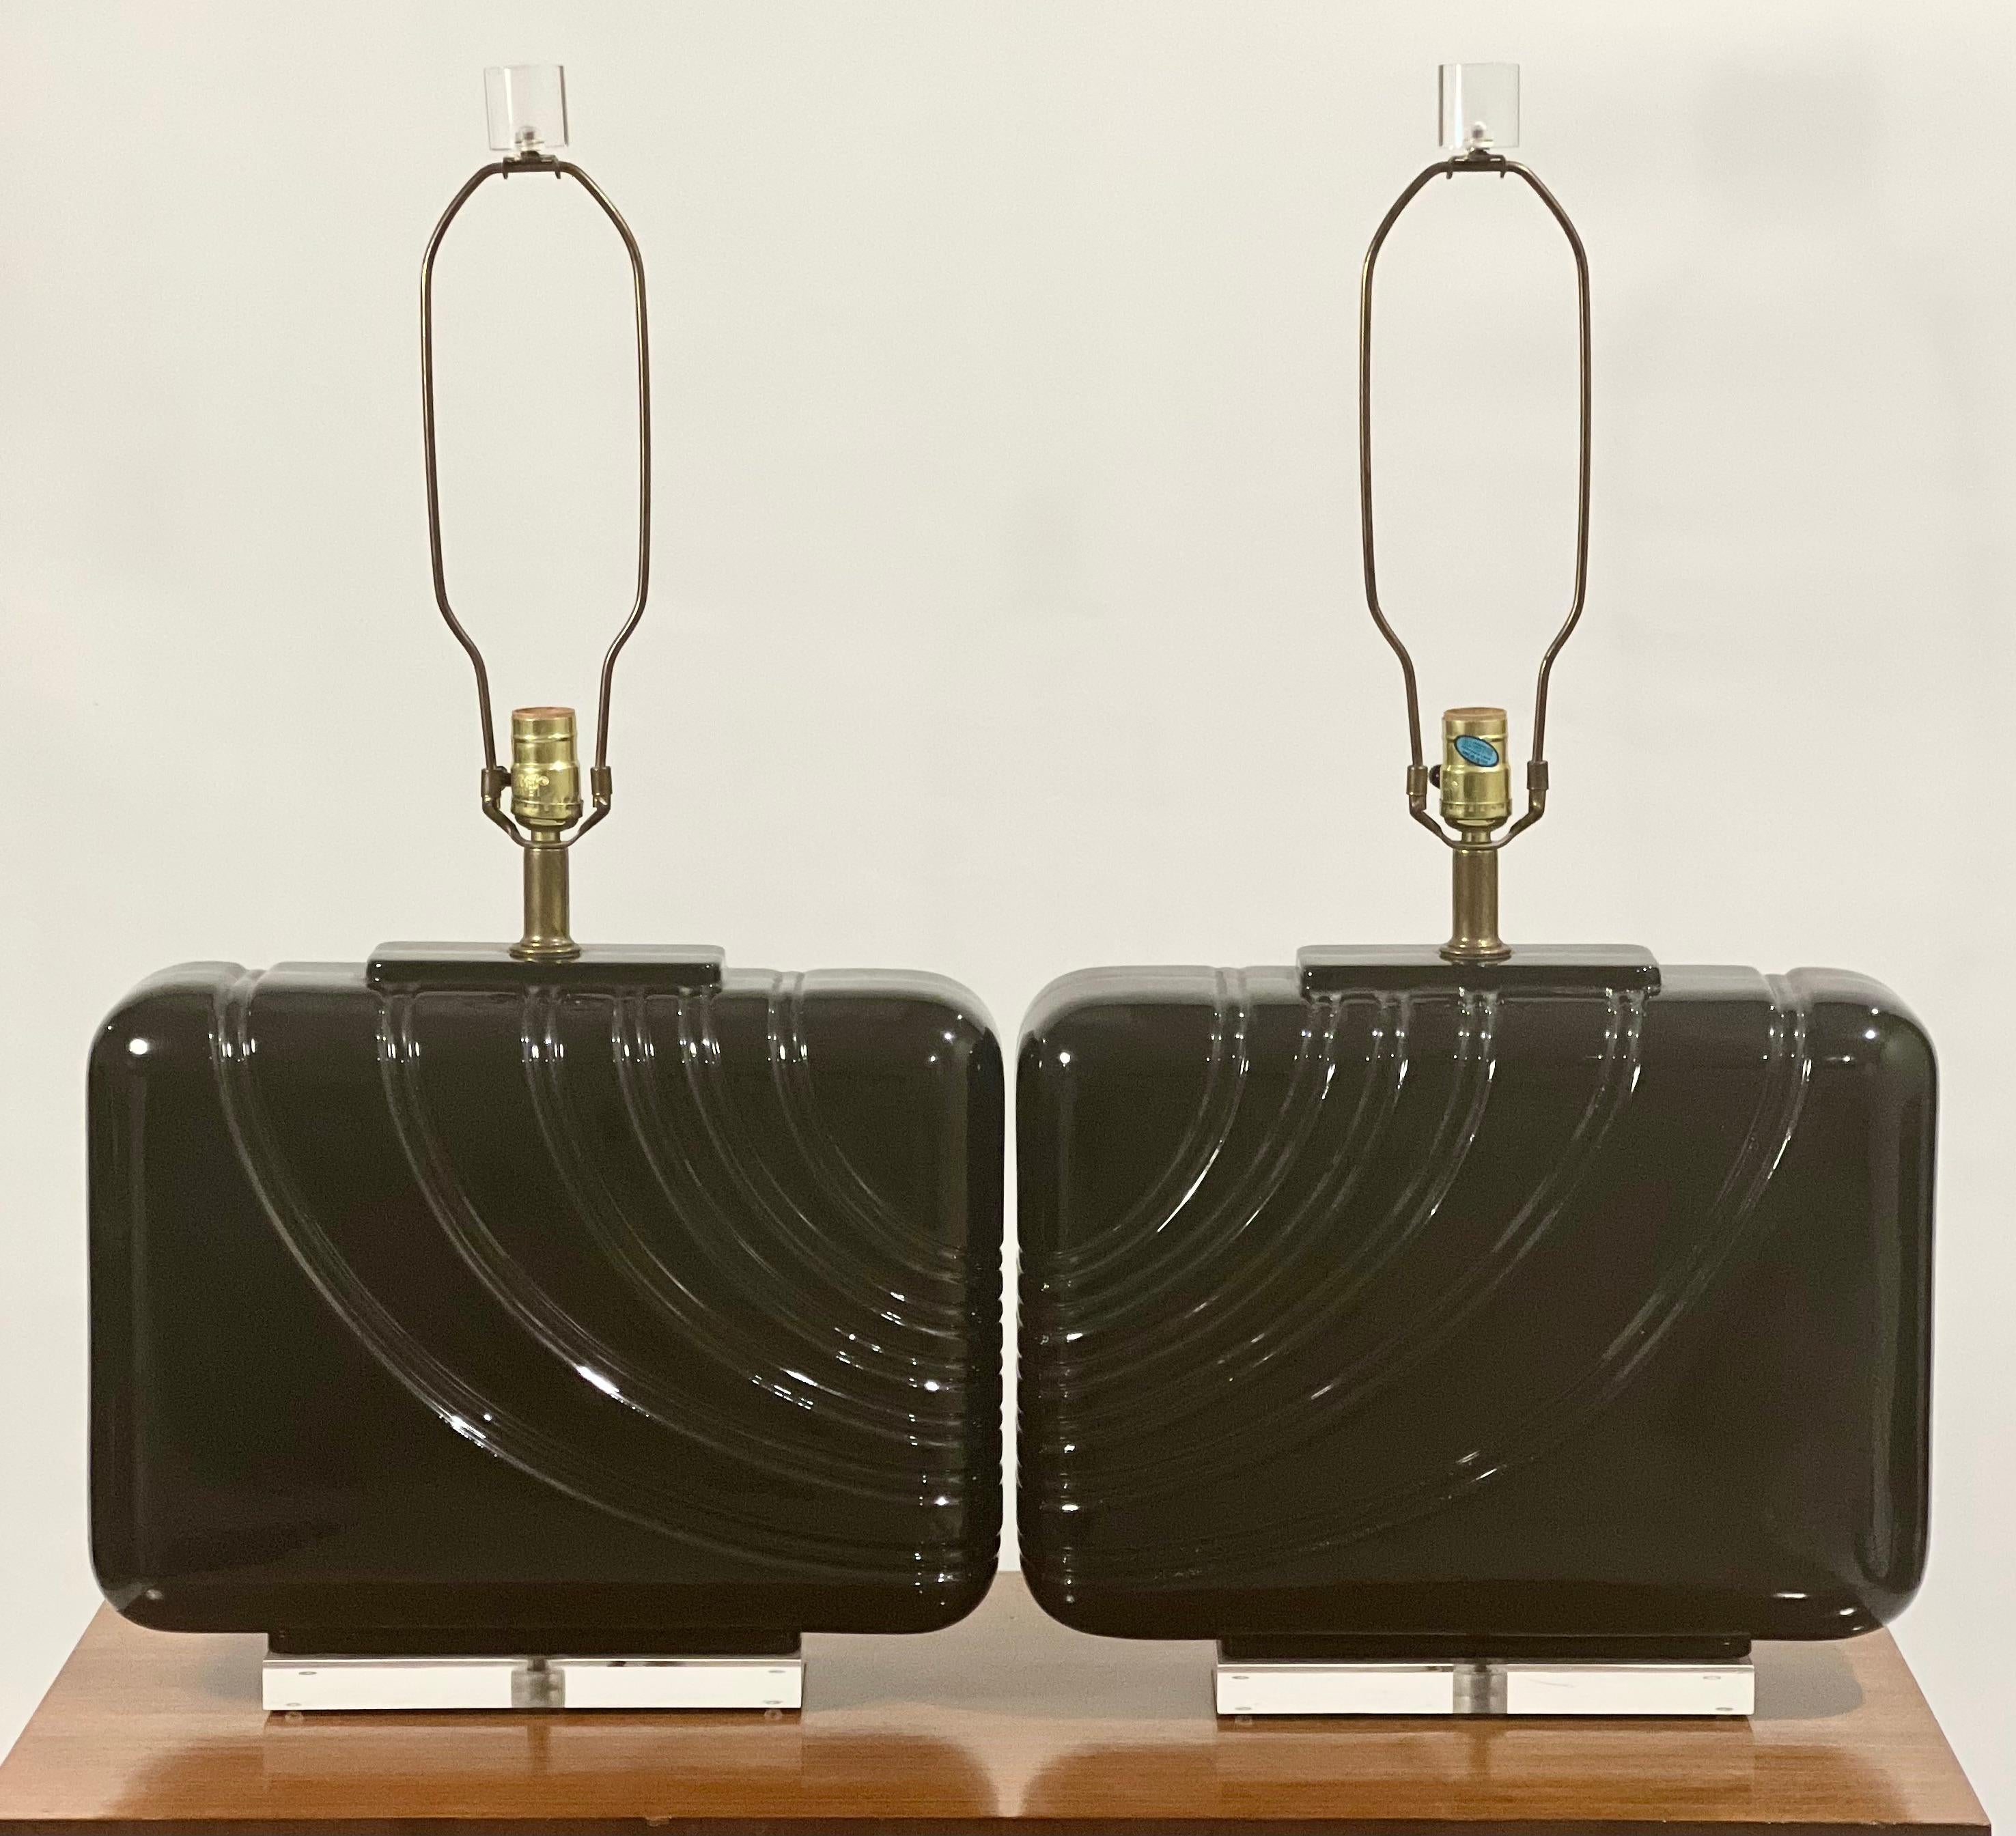 A gorgeous pair of oversized black glazed ceramic lamps from the 1980's.

Each lamp features a continual, channeled wave pattern on a rounded rectangular body with a lucite base and coordinating cylinder form finial. The glazed ceramic has a high